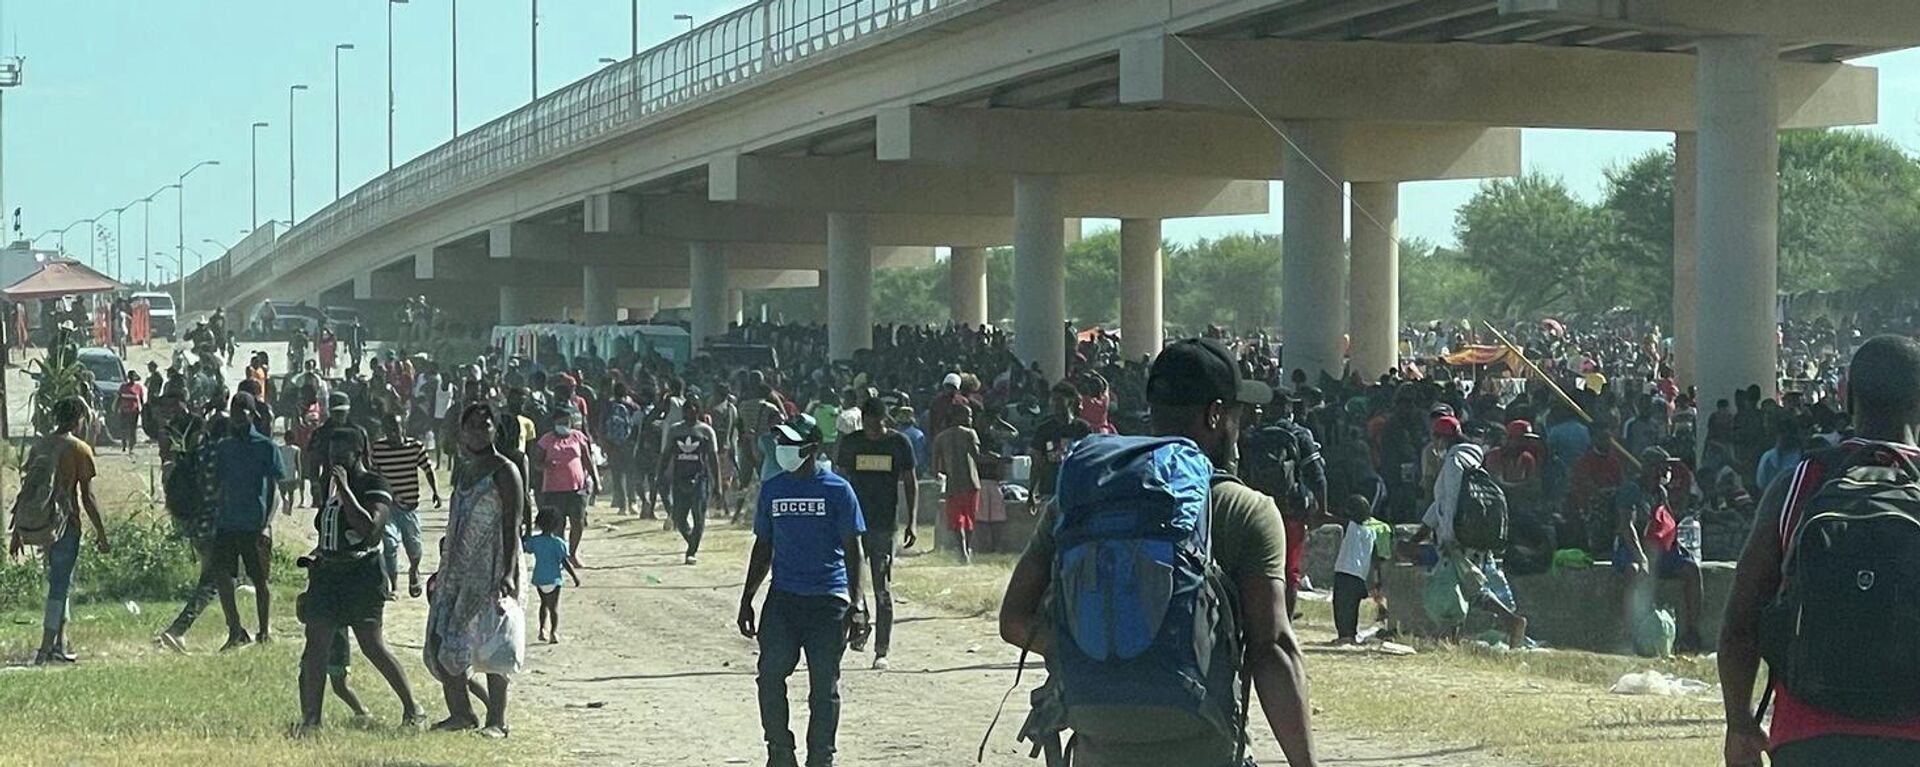 Migrants are seen by the International Bridge between Mexico and the U.S., in Del Rio, Texas, U.S., September 16, 2021, in this picture obtained from social media. Picture taken September 16, 2021 - Sputnik International, 1920, 18.09.2021